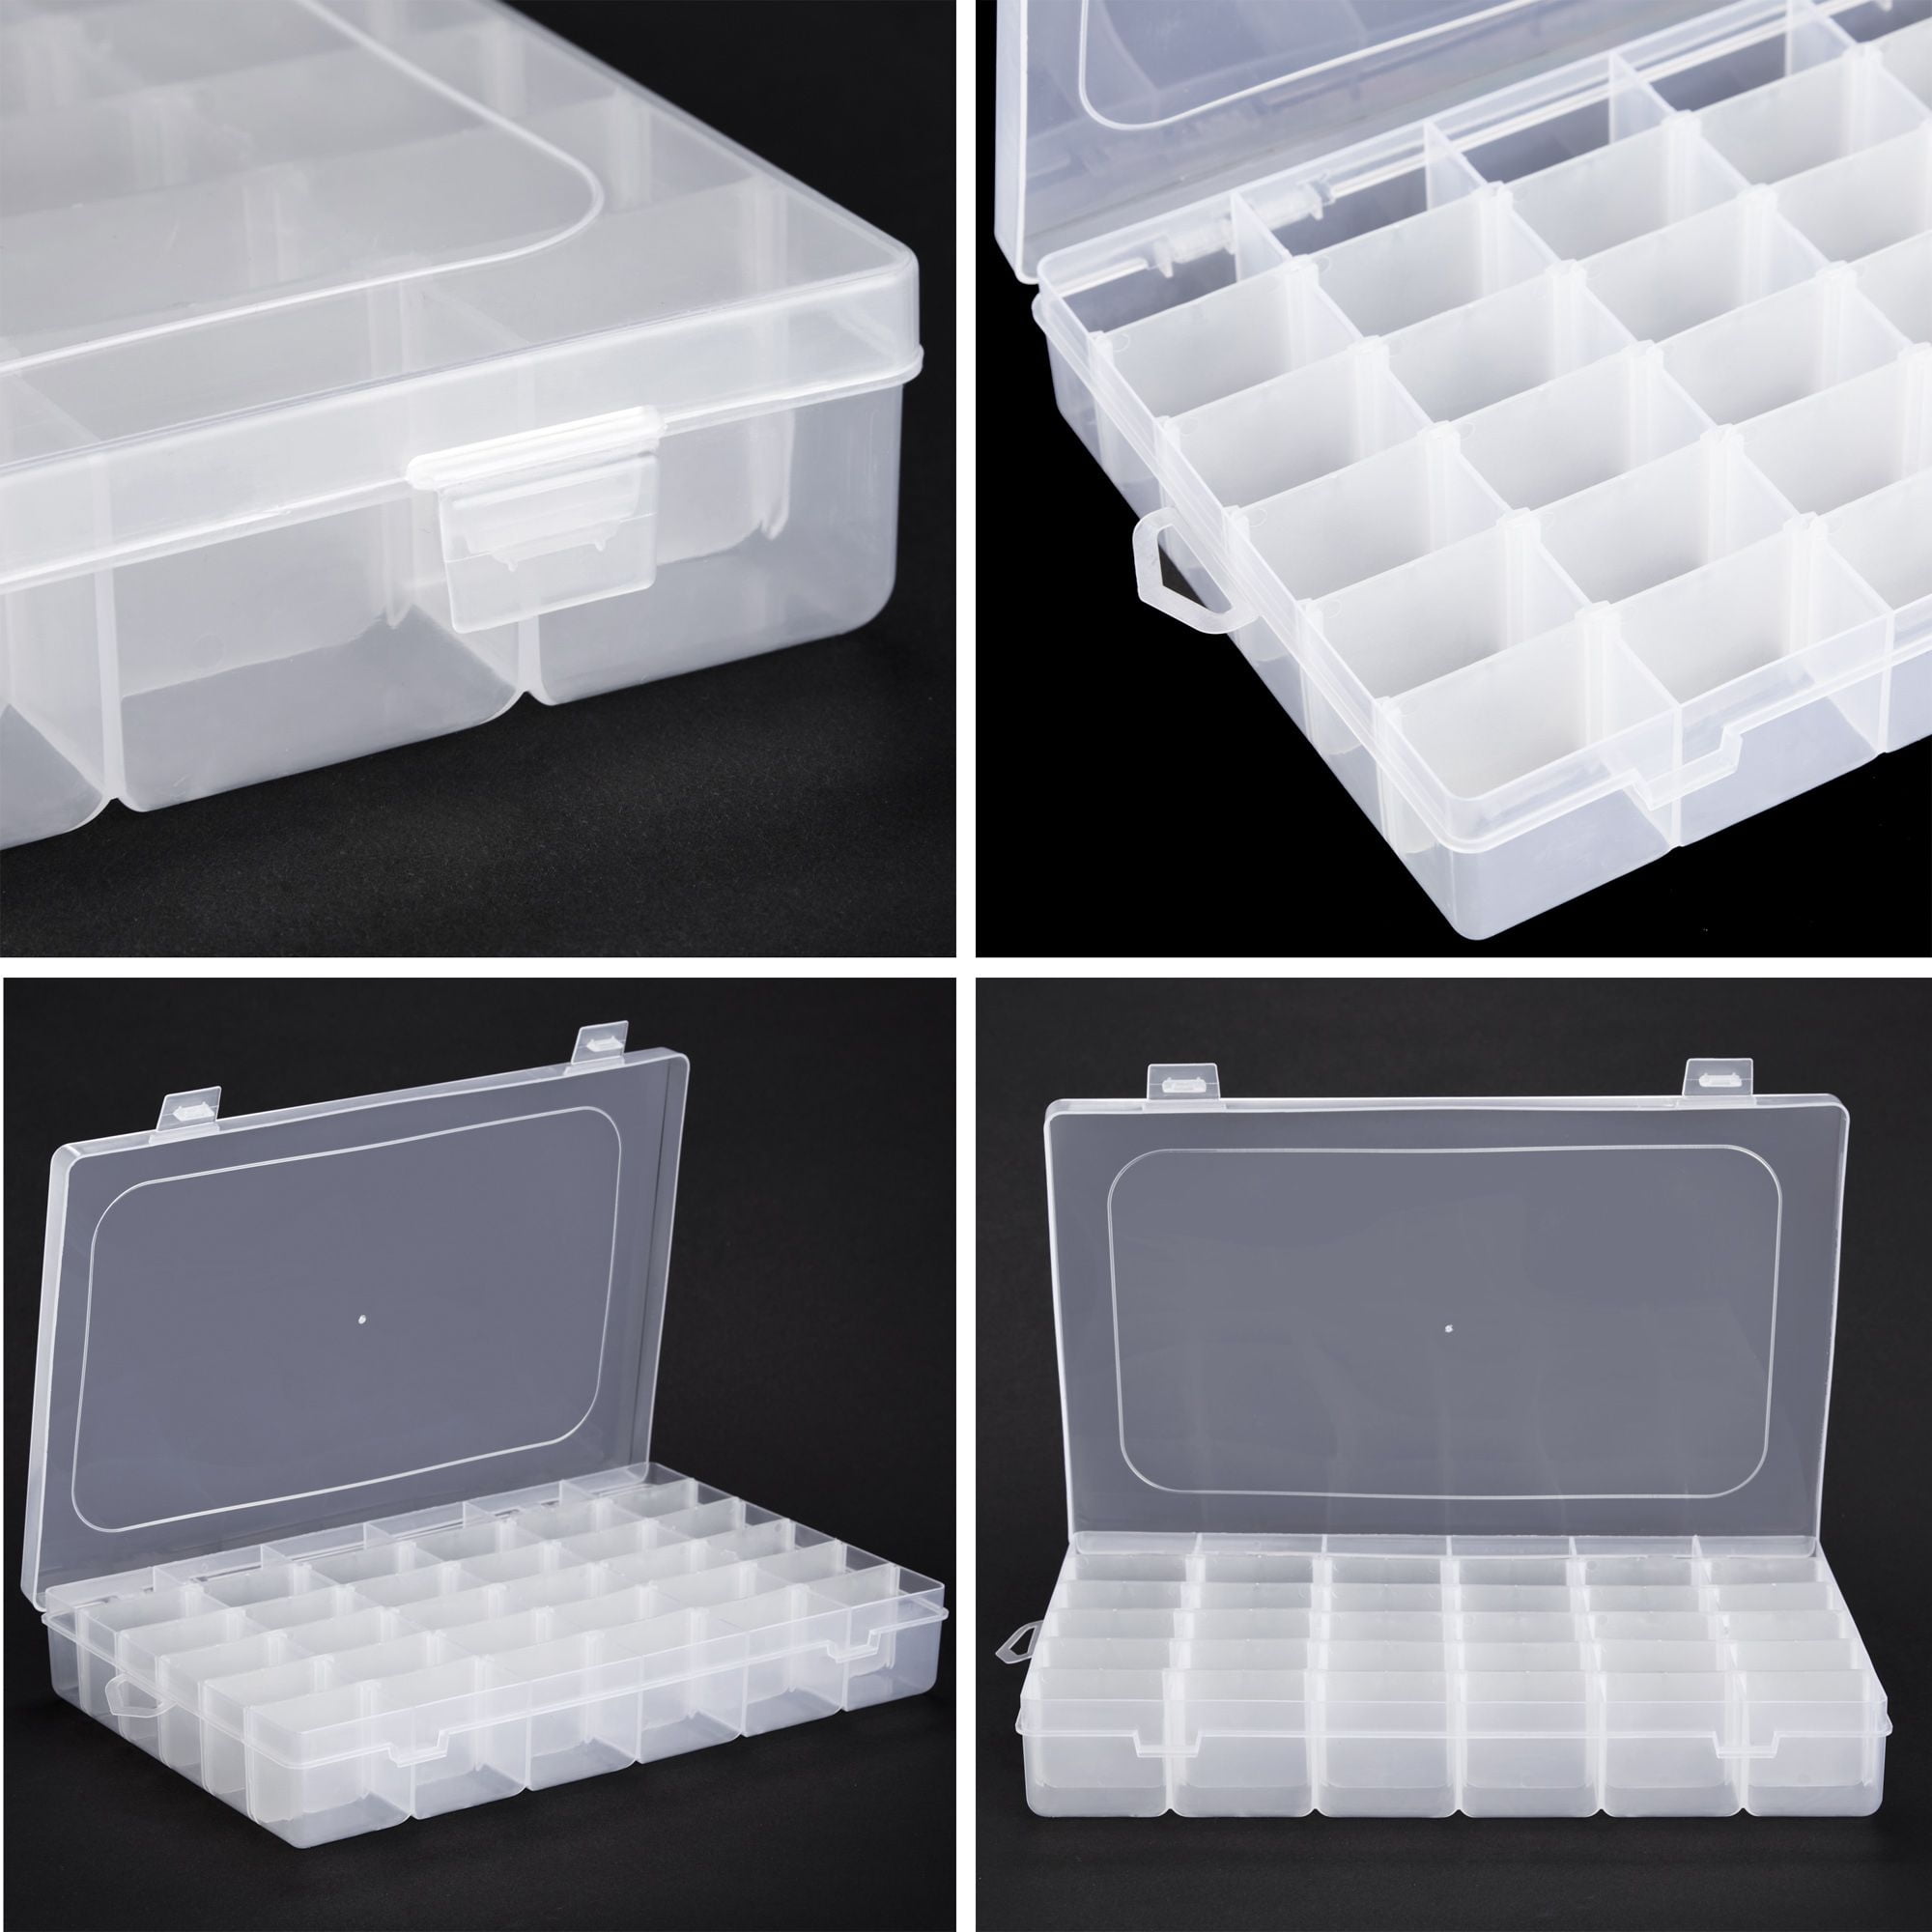 Credible Mart 1371 Dividers Tray Organizer Clear Plastic Bead